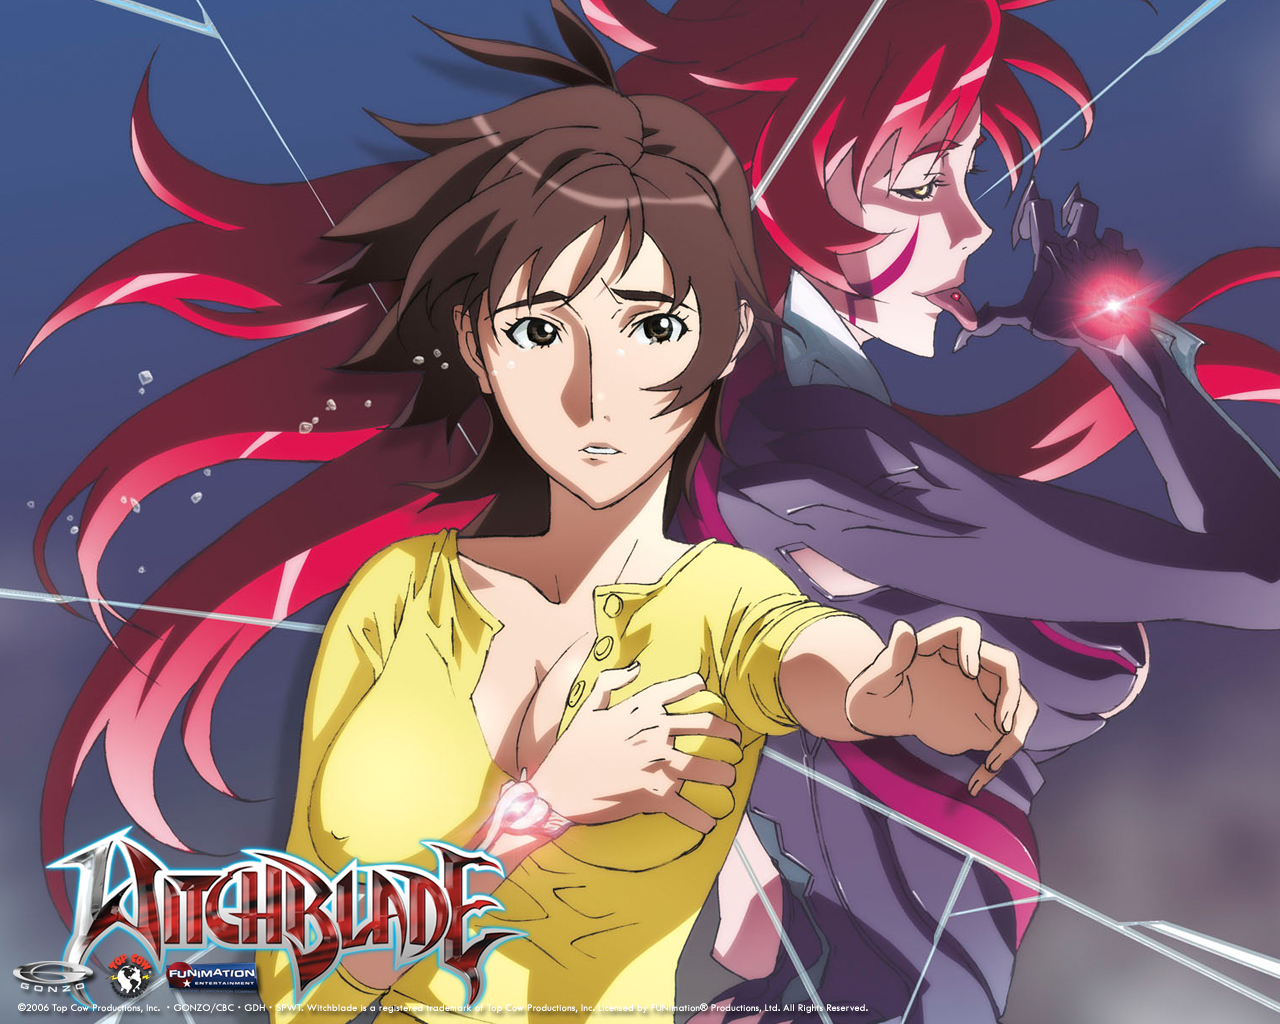 Witchblade Anime Image HD Wallpaper And